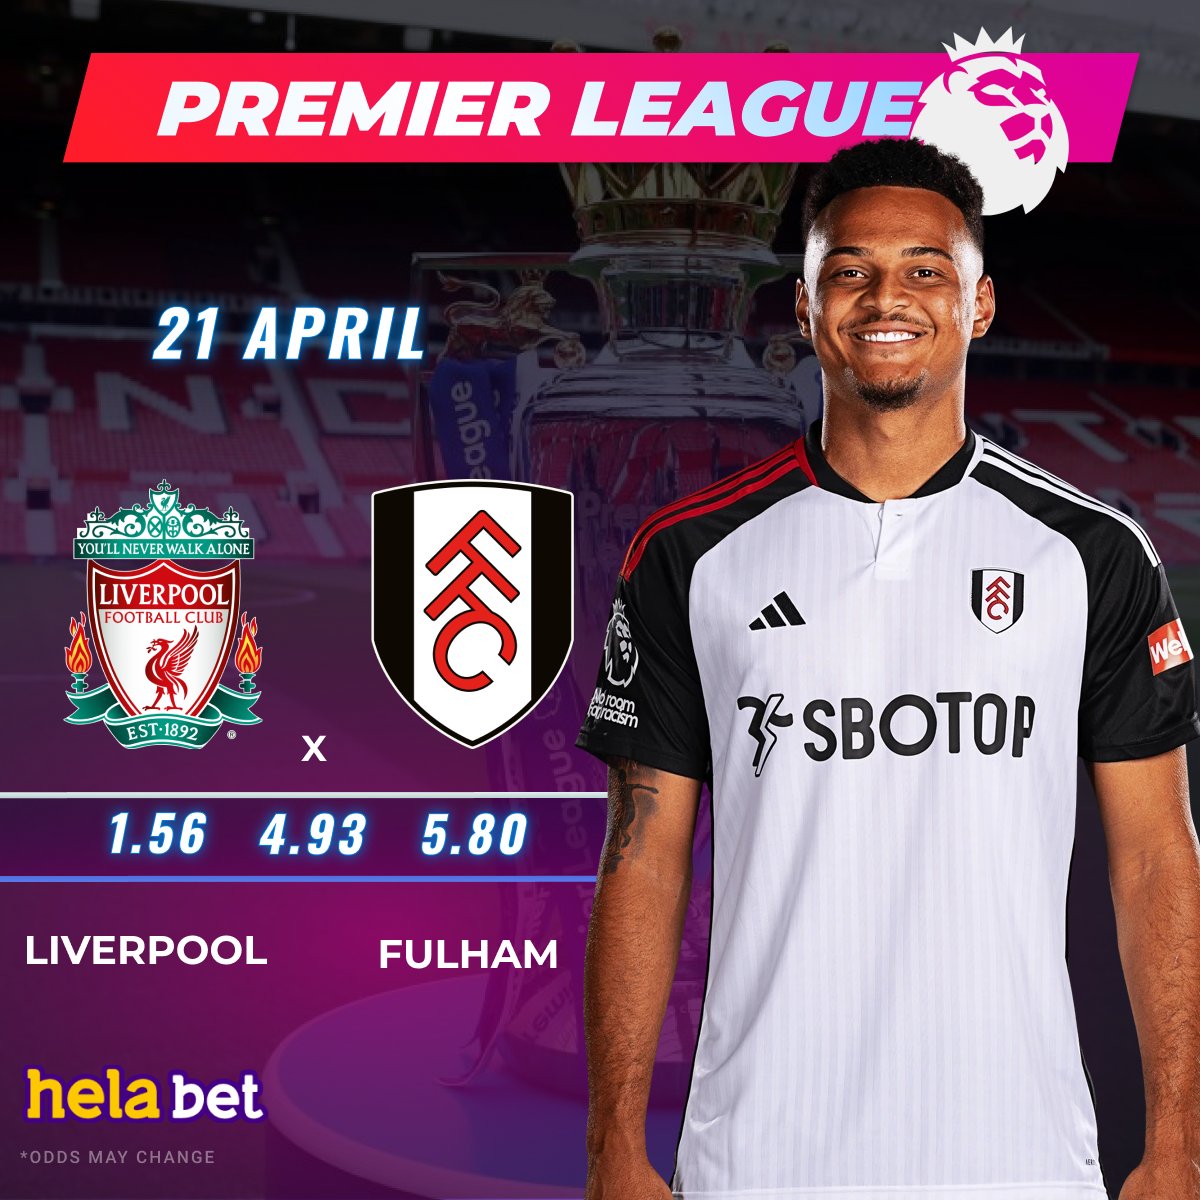 🇬🇧 Premier League 🦁 ⚽ #Fulham will play #Liverpool at home. 👉 Will the visitors be able to score three points today❓👍 Place a bet in #helabet 👉 cutt.ly/UwY8h1uG #epl #premierleague #betting #football